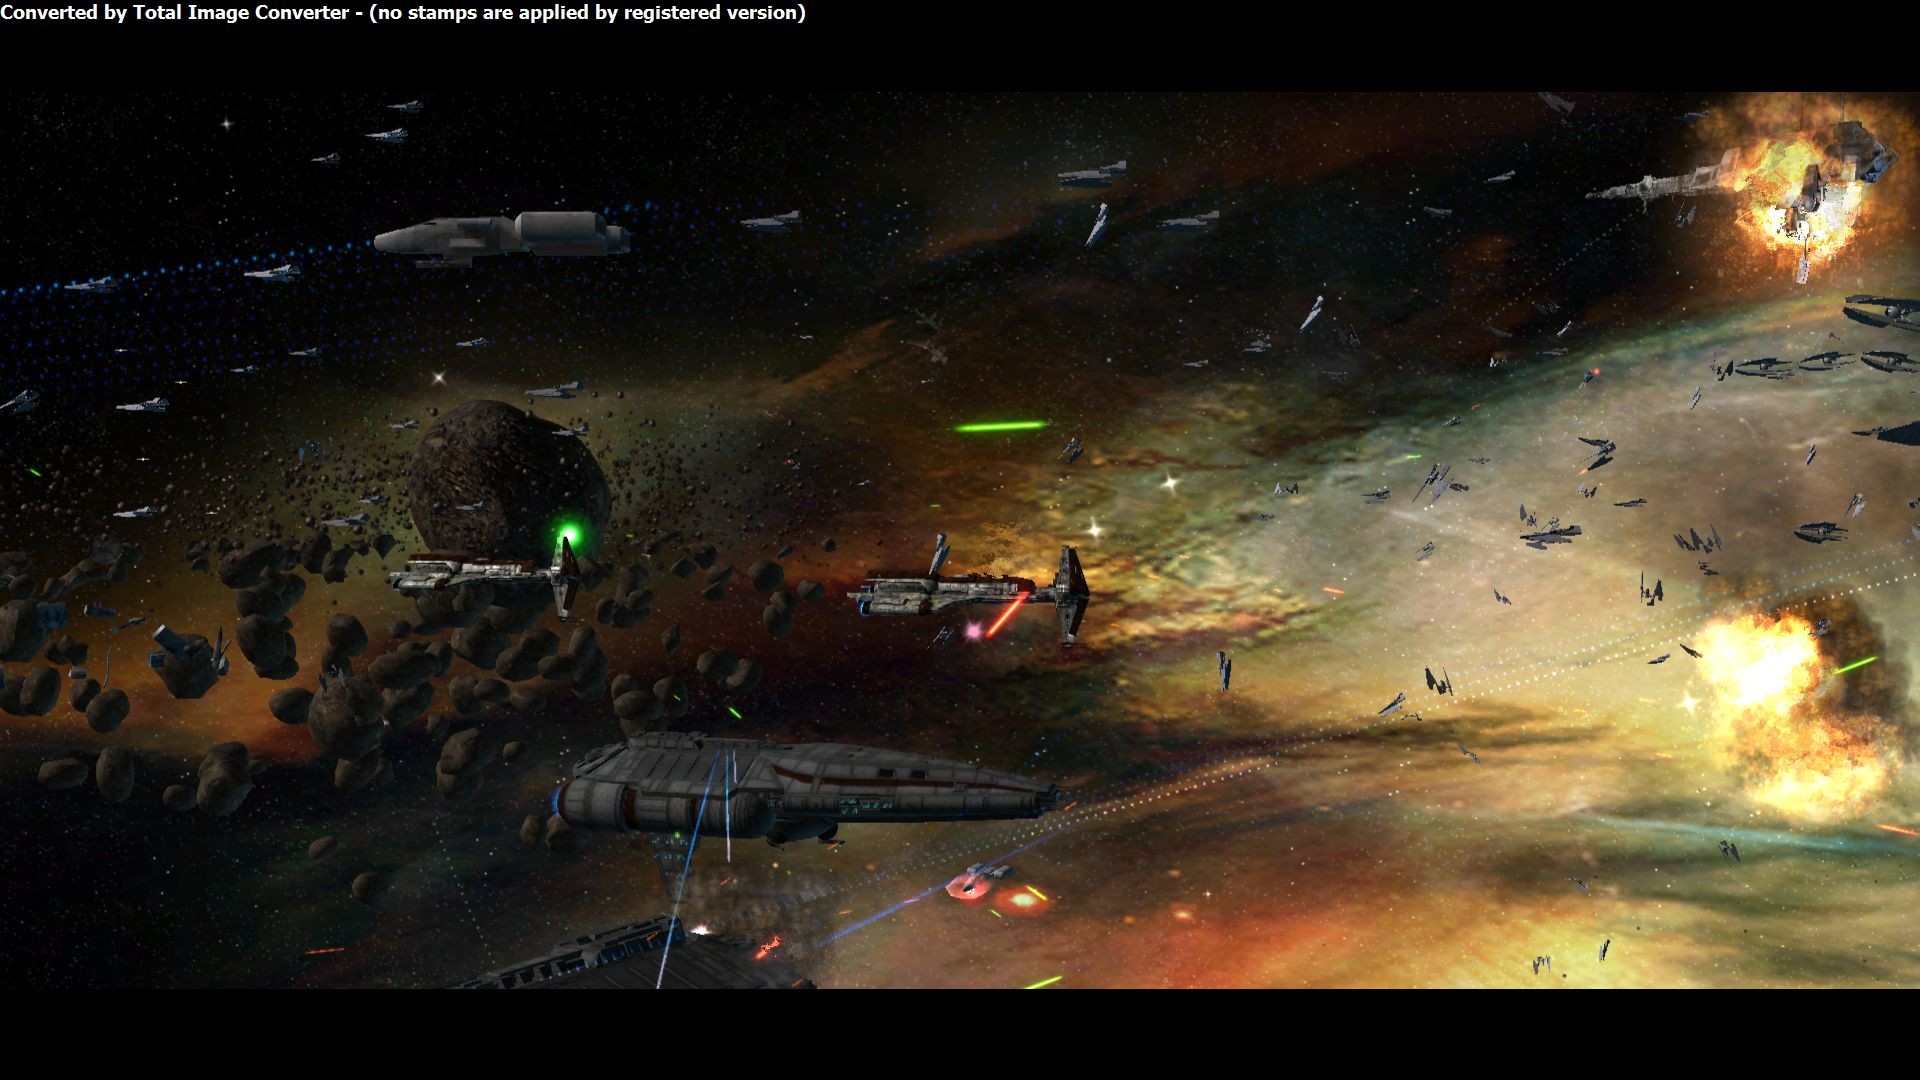 1920x1080 The most epic battle... image - Old Republic at War mod for Star